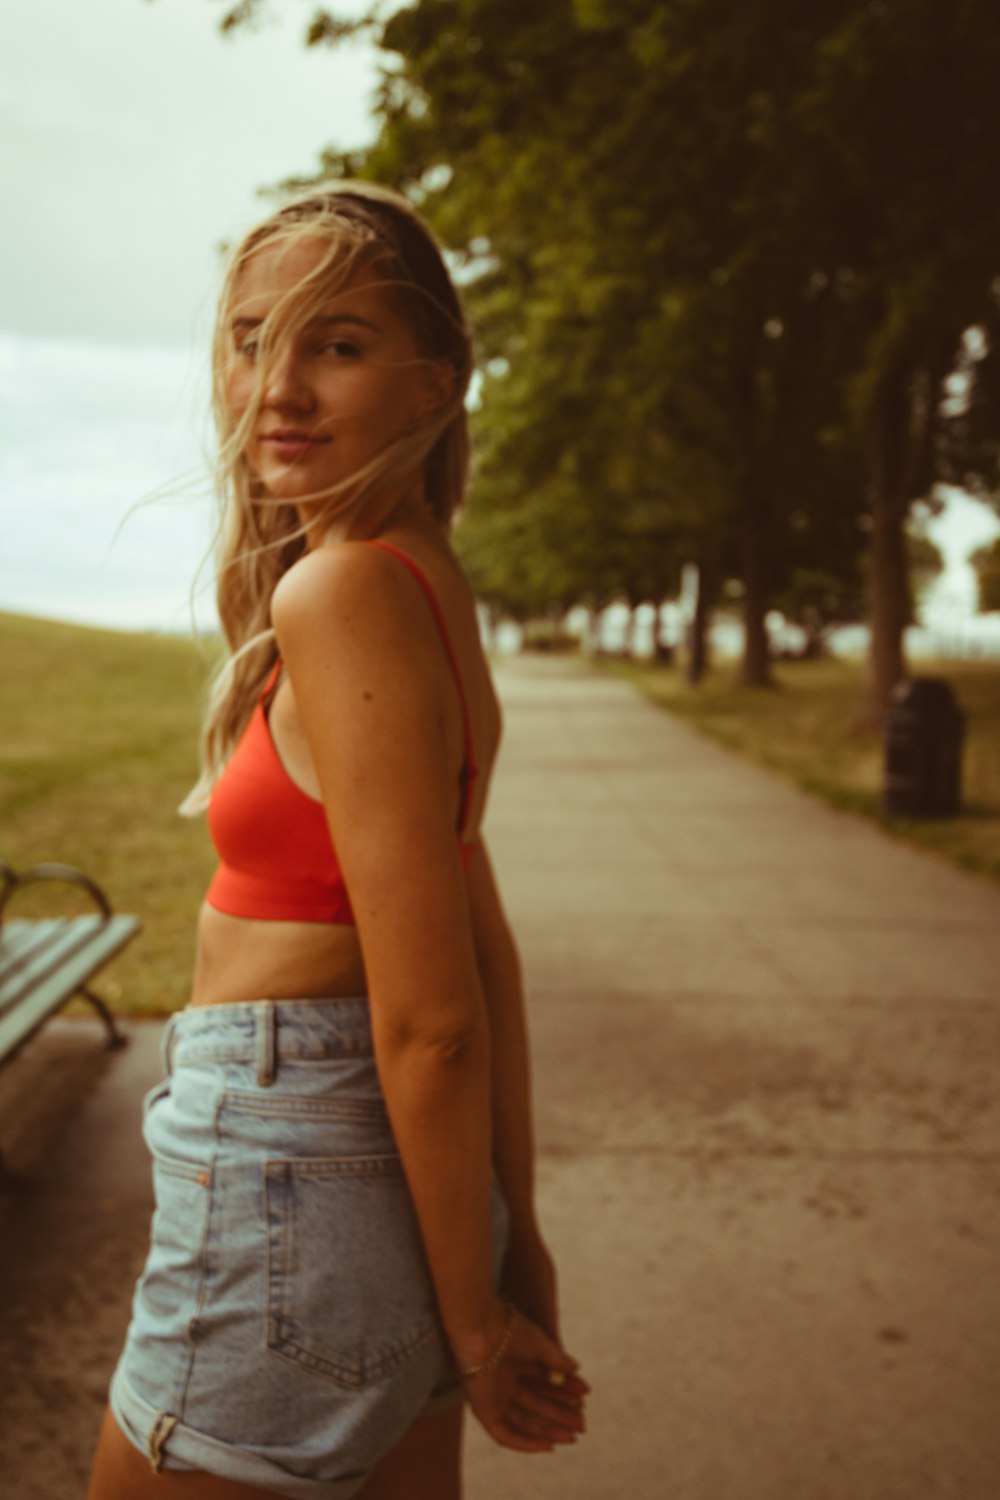 Woman in red sports bra and blue denim shorts standing on gray